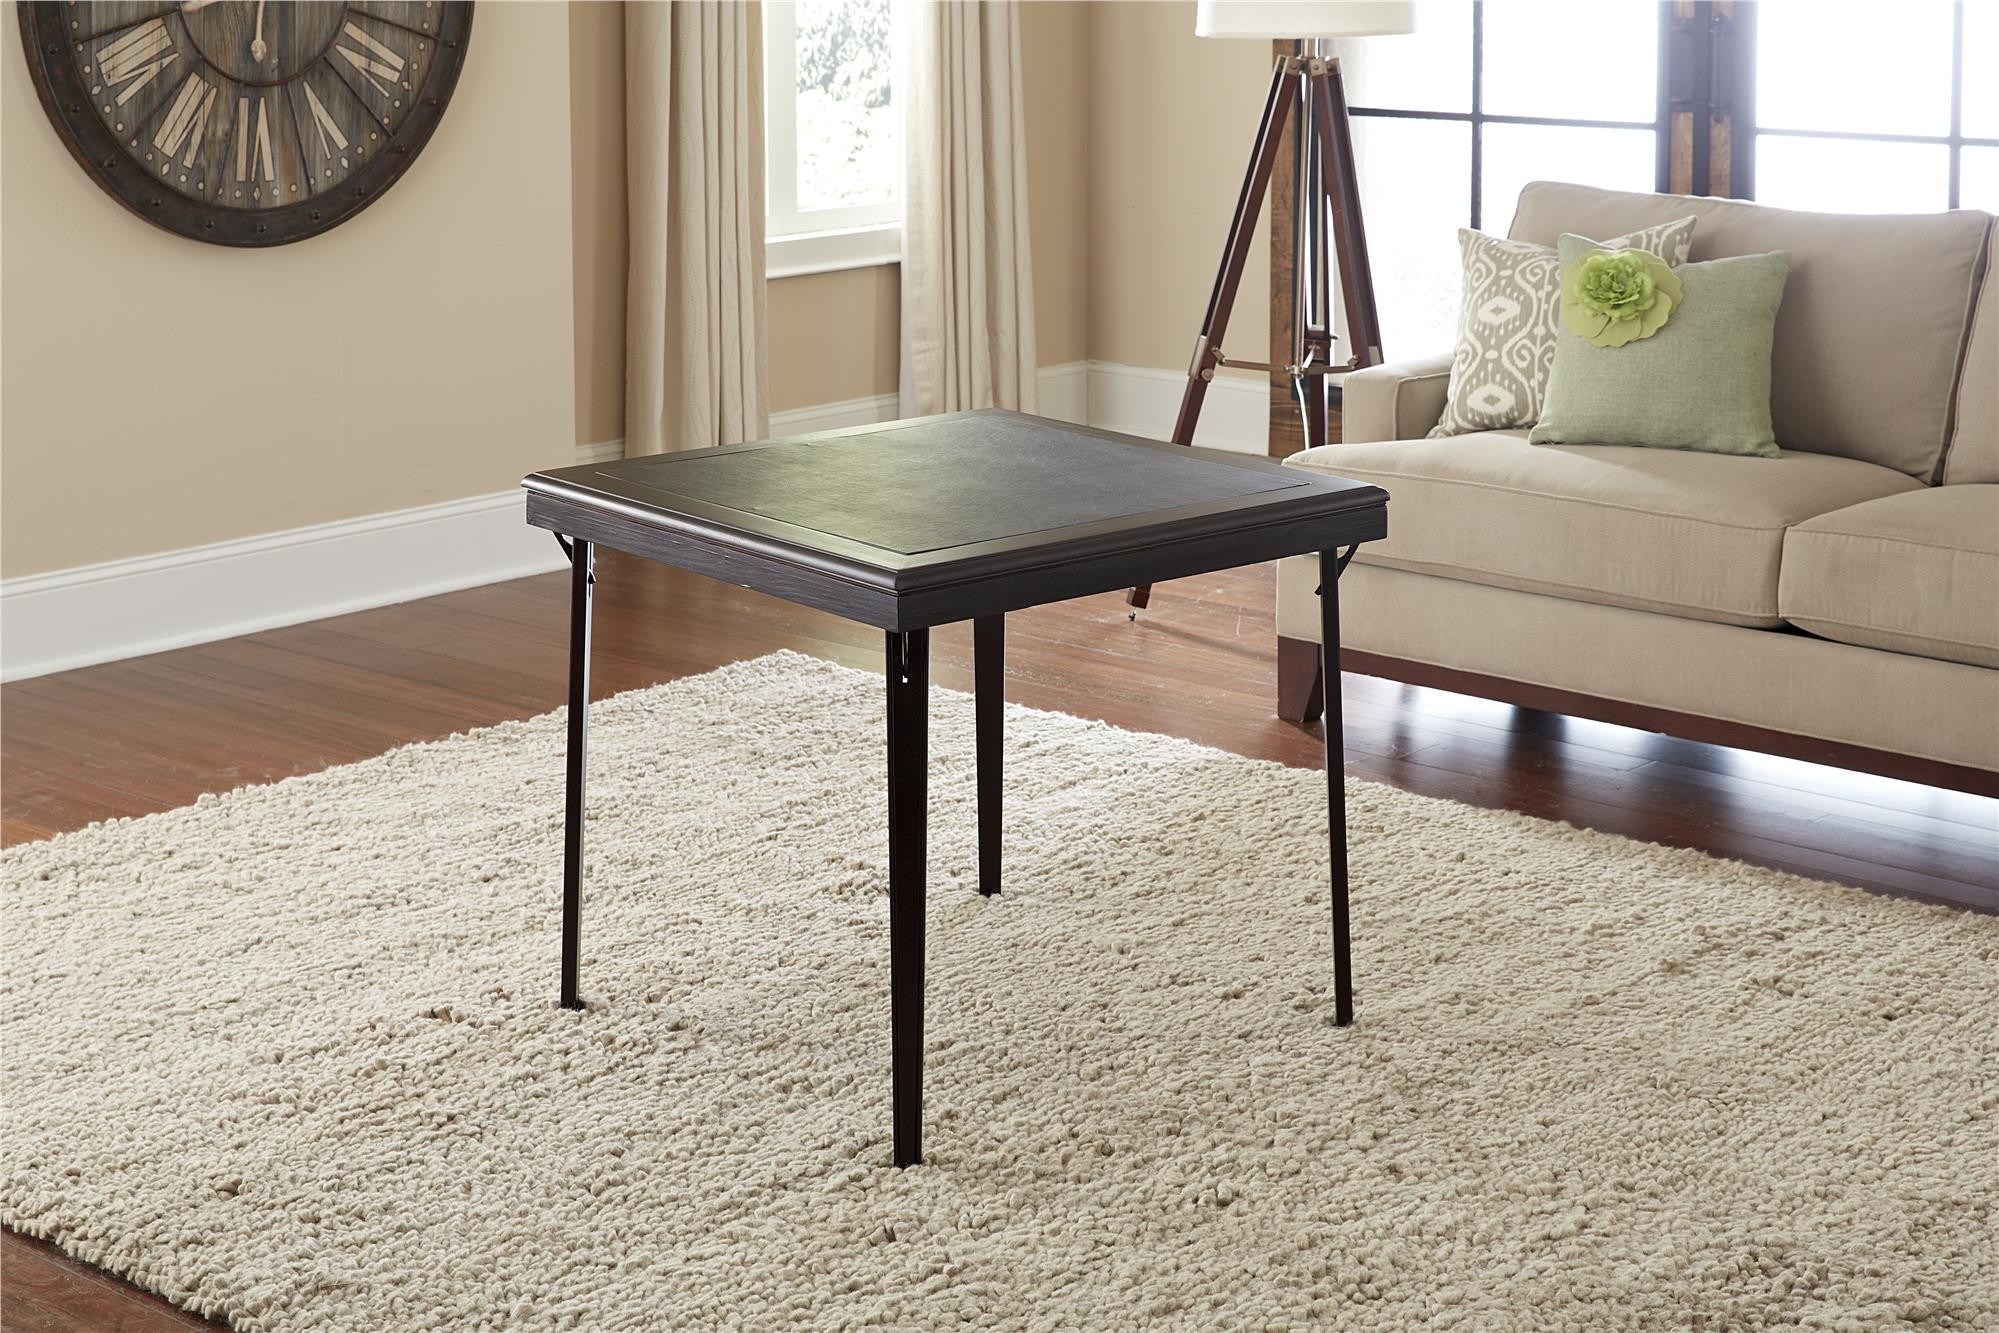 COSCO 32” Square Folding Table with Vinyl Inset